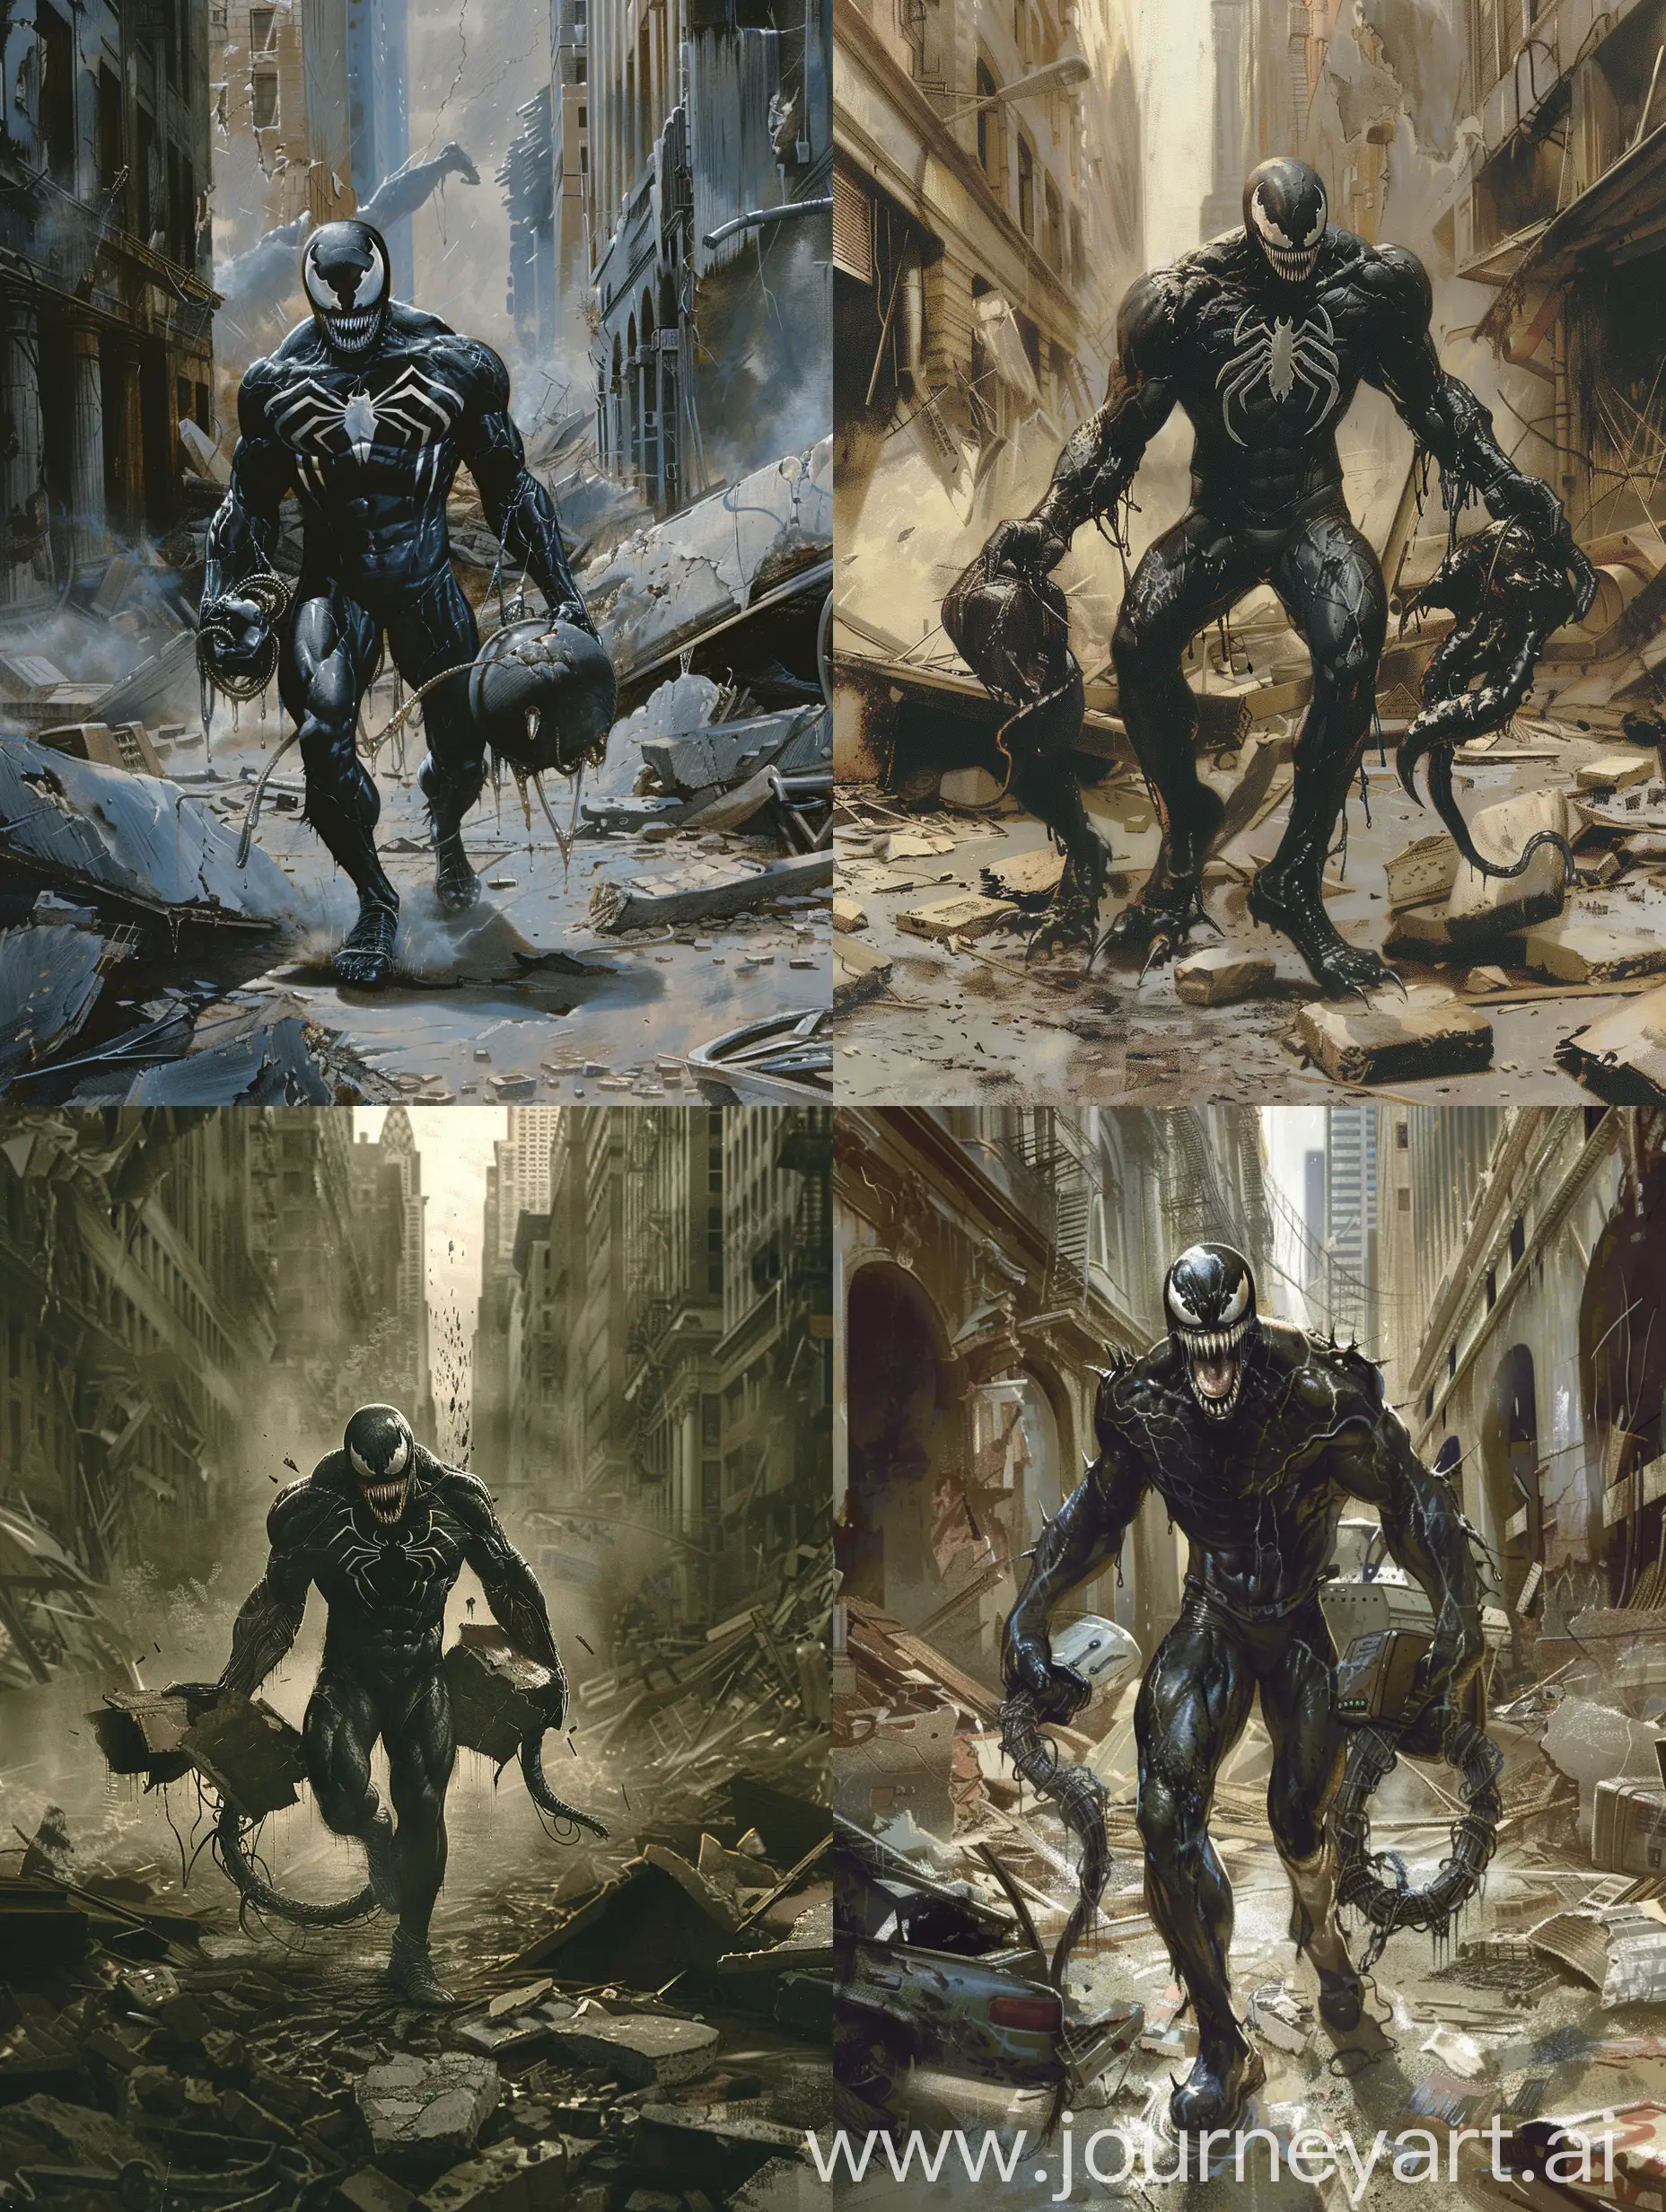 Spider-Man as venom walking through a destroyed New York IN PAIN AND ANGER, HOLDING EXTREMLY HEAVY OBJECTS, dragging them across the floor. In DESTROYED STREET NEW YORK.